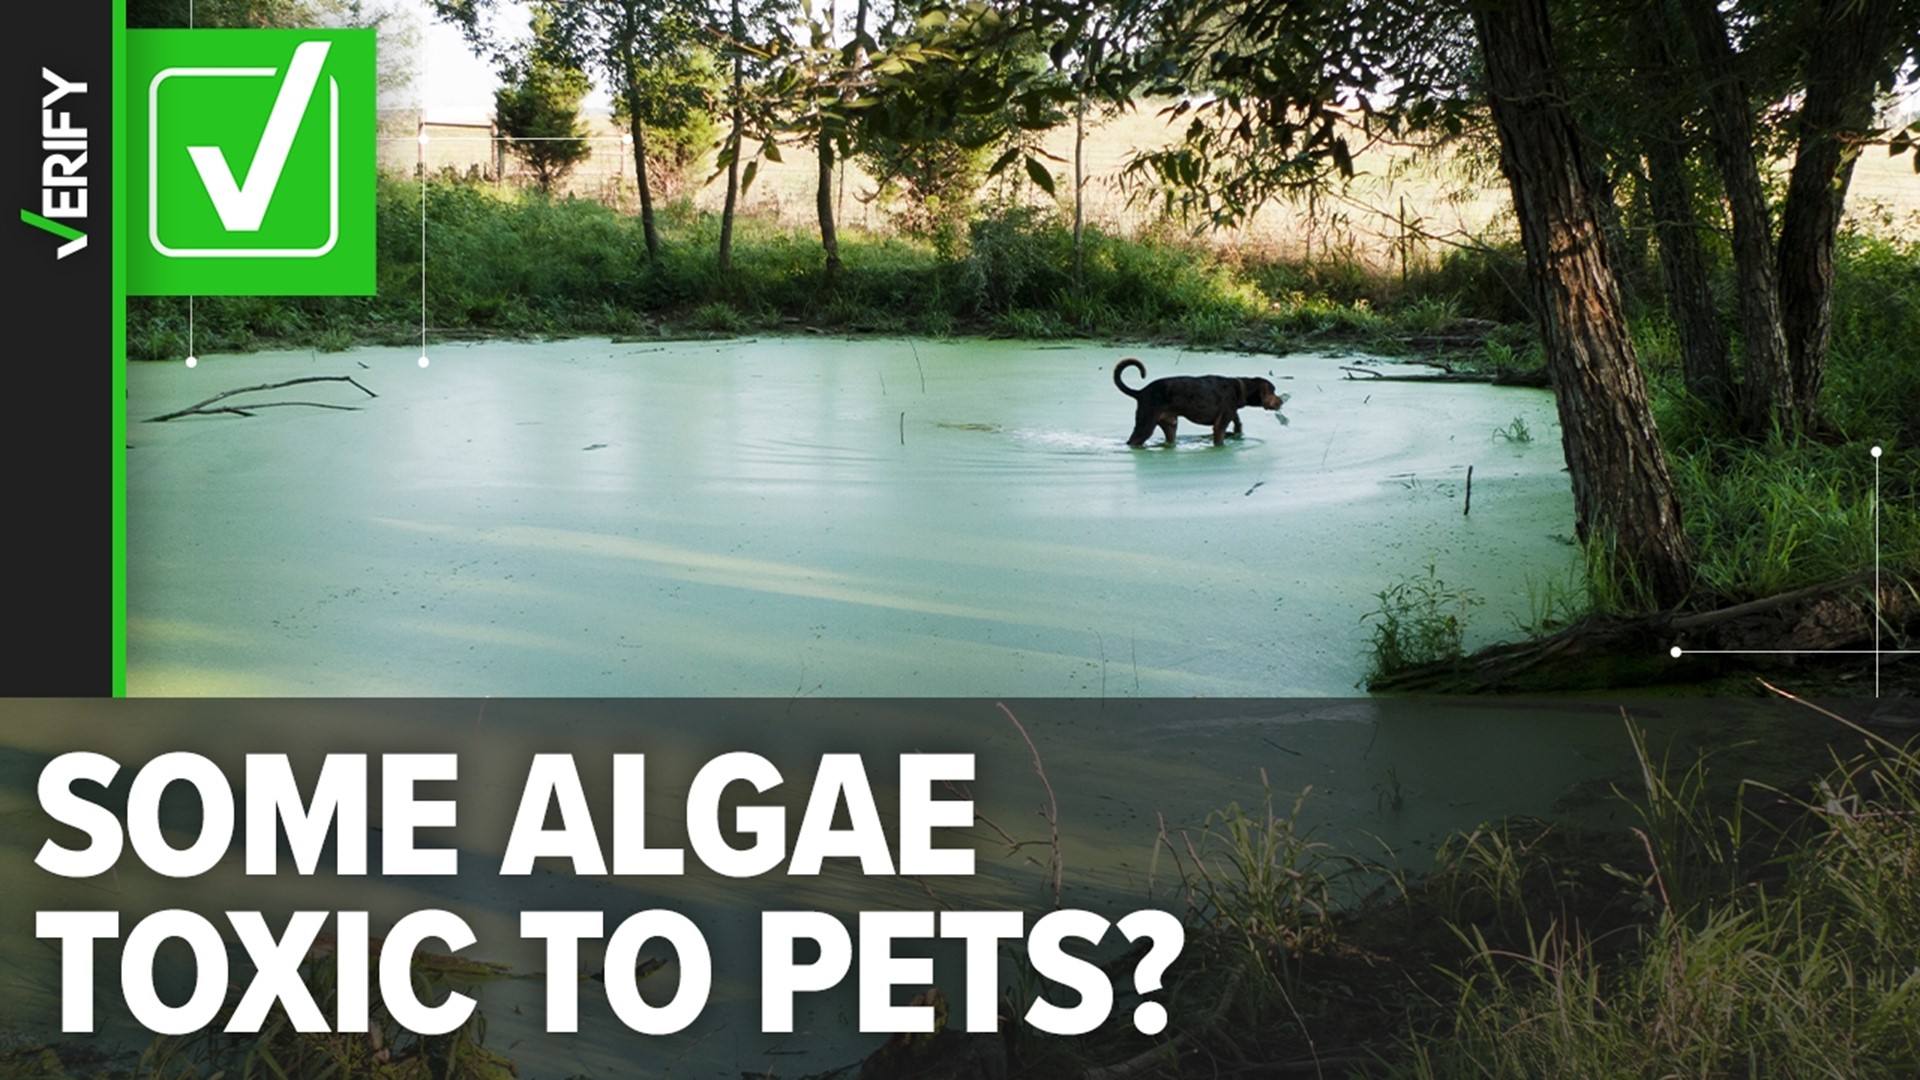 Here’s what blue-green algae looks like in lakes and other bodies of water, and what to know about the signs of toxicity in pets.